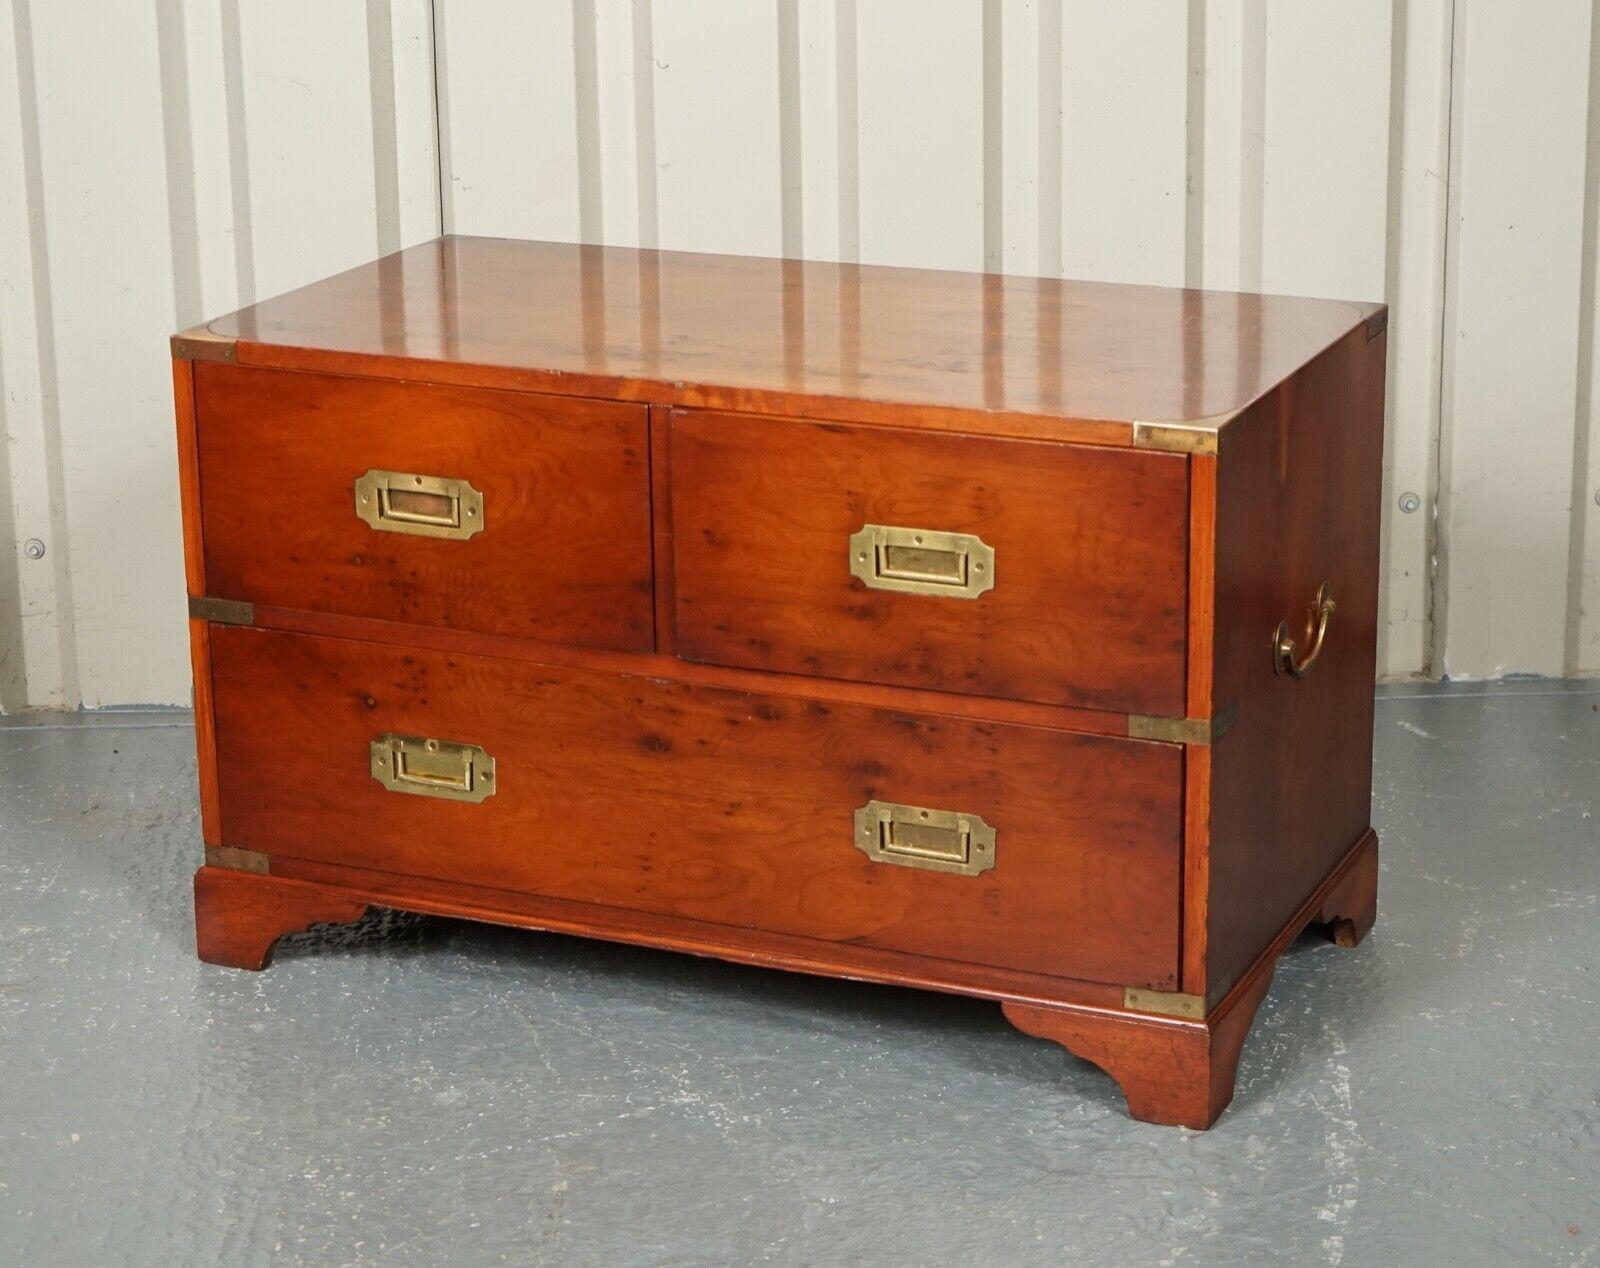 We are so excited to present to you this Lovely Harrods for Kennedy Furniture London Vintage Bevan Funnell Yew Wood Chest of Drawers.

A very well made and solid piece of furniture.

We have lightly restored this by giving it a hand clean, waxed